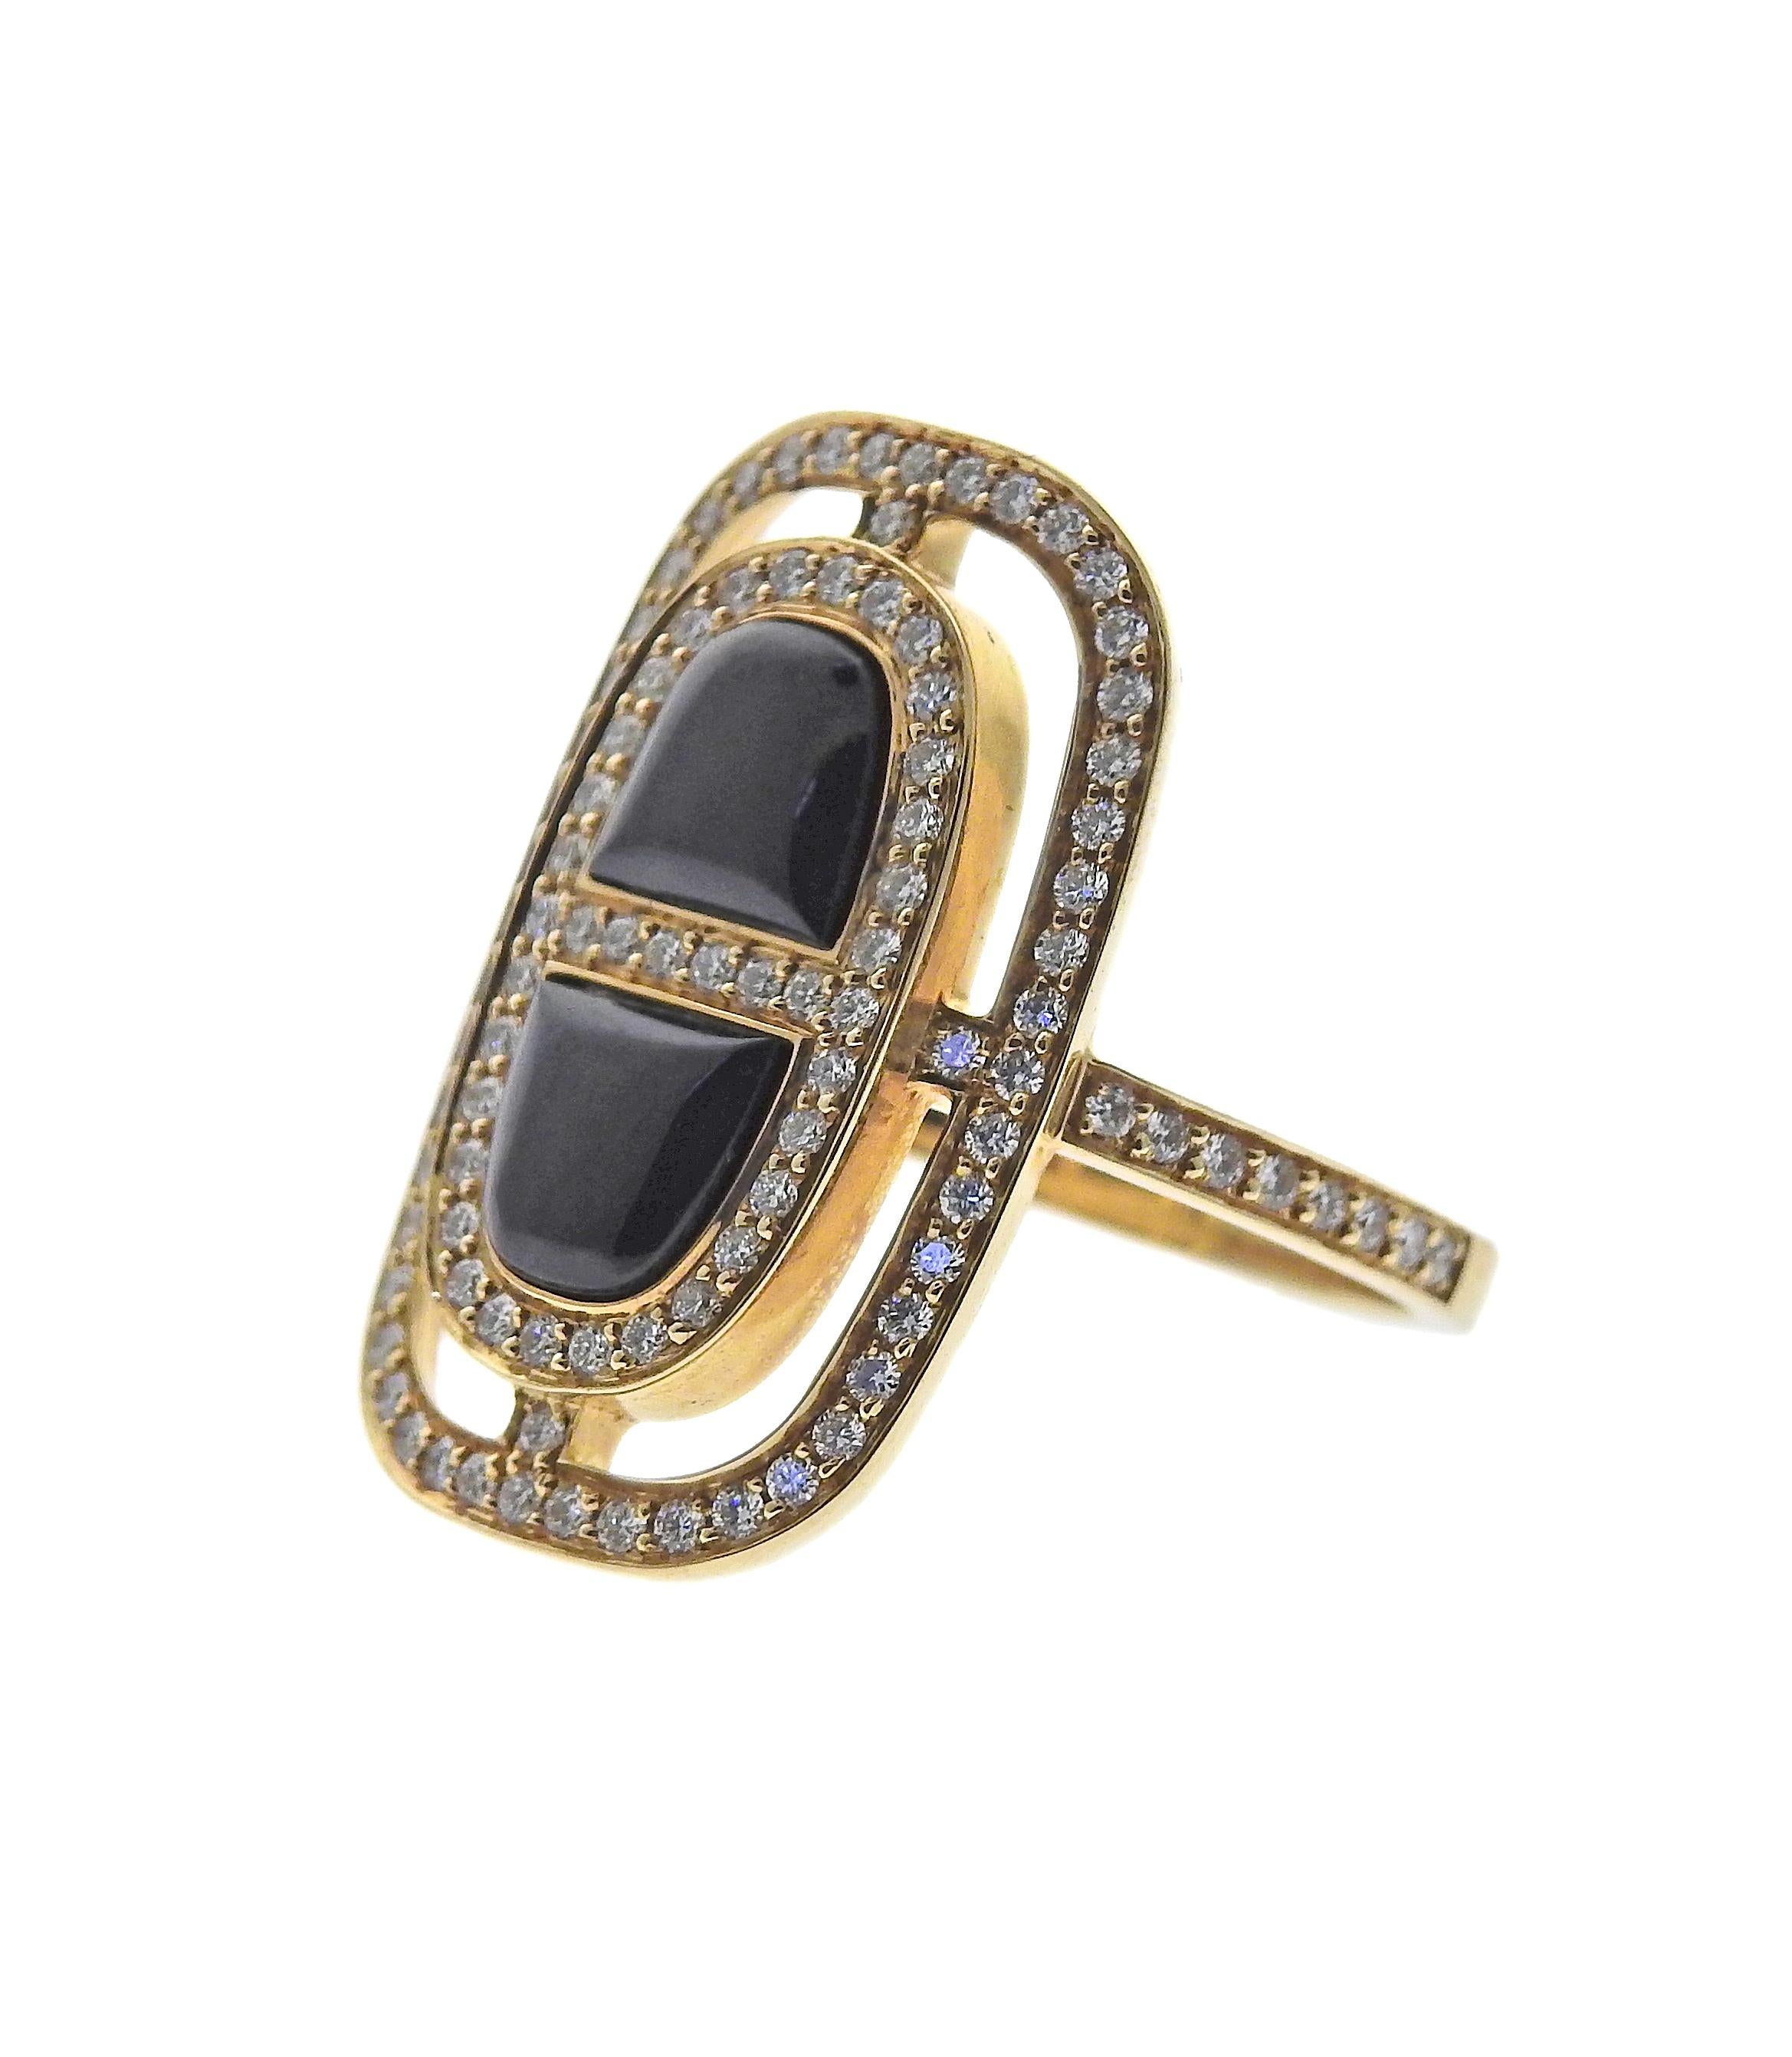 Hermes Chaine D'Ancre 18K yellow gold onyx ring set with 0.60ctw in VS/F diamonds. Ring size 57 ( US 8) top measures 25mm x 18mm. Marked: Hermes, made in France, 57, 18AD071123, 106D 0.60ct, Au750. Weight is 8.5 grams.